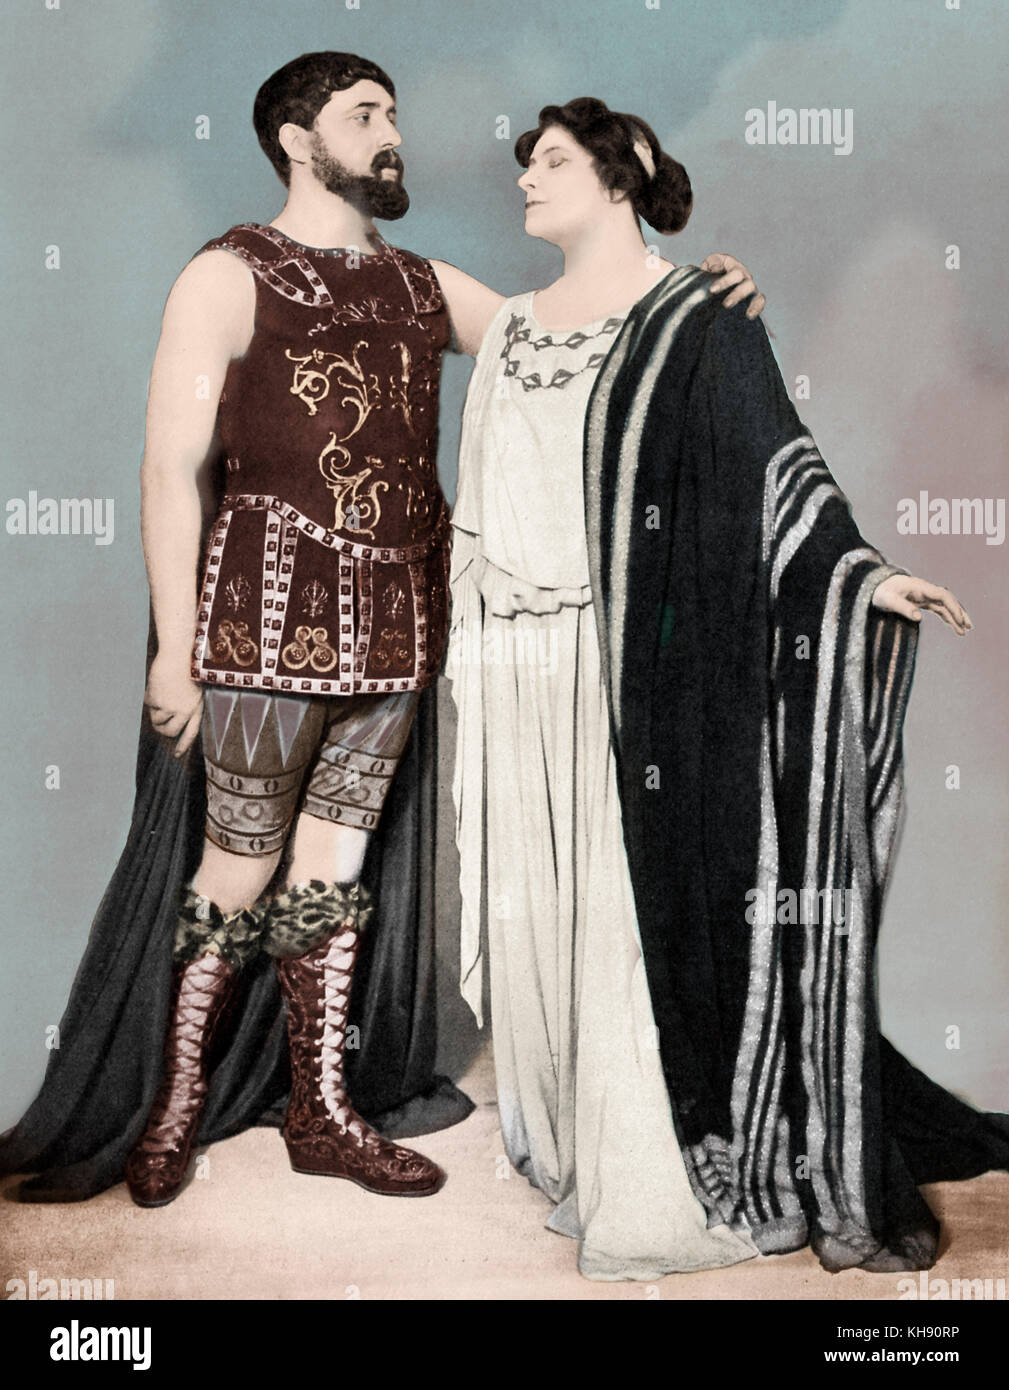 Penelope played by Lucienne Breval and Ulysse played by Muratore in ' Penelope ' , opera by Gabriel Fauré.Successful revivial performance at Theatre des Champs Elysees, Paris, 10 May 1913. Photo by Gerschel. GF: French composer, 12th May 1845 - 4th November 1924. Stock Photo